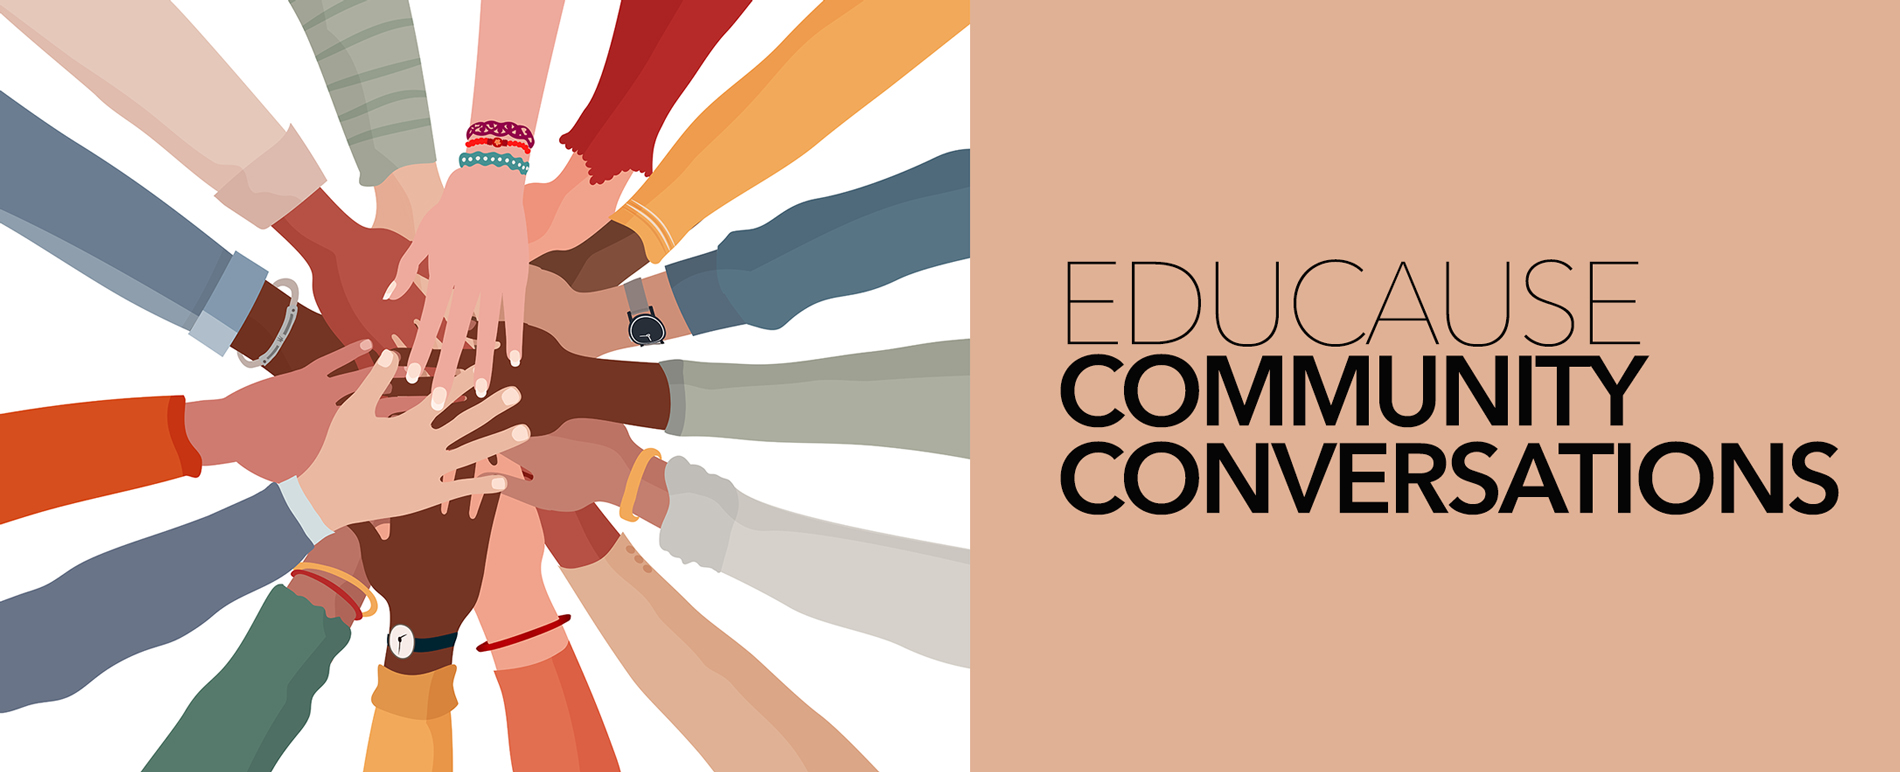 Community Conversations: Paul LeBlanc on Equity, Access, and Opportunity for Students [podcast]